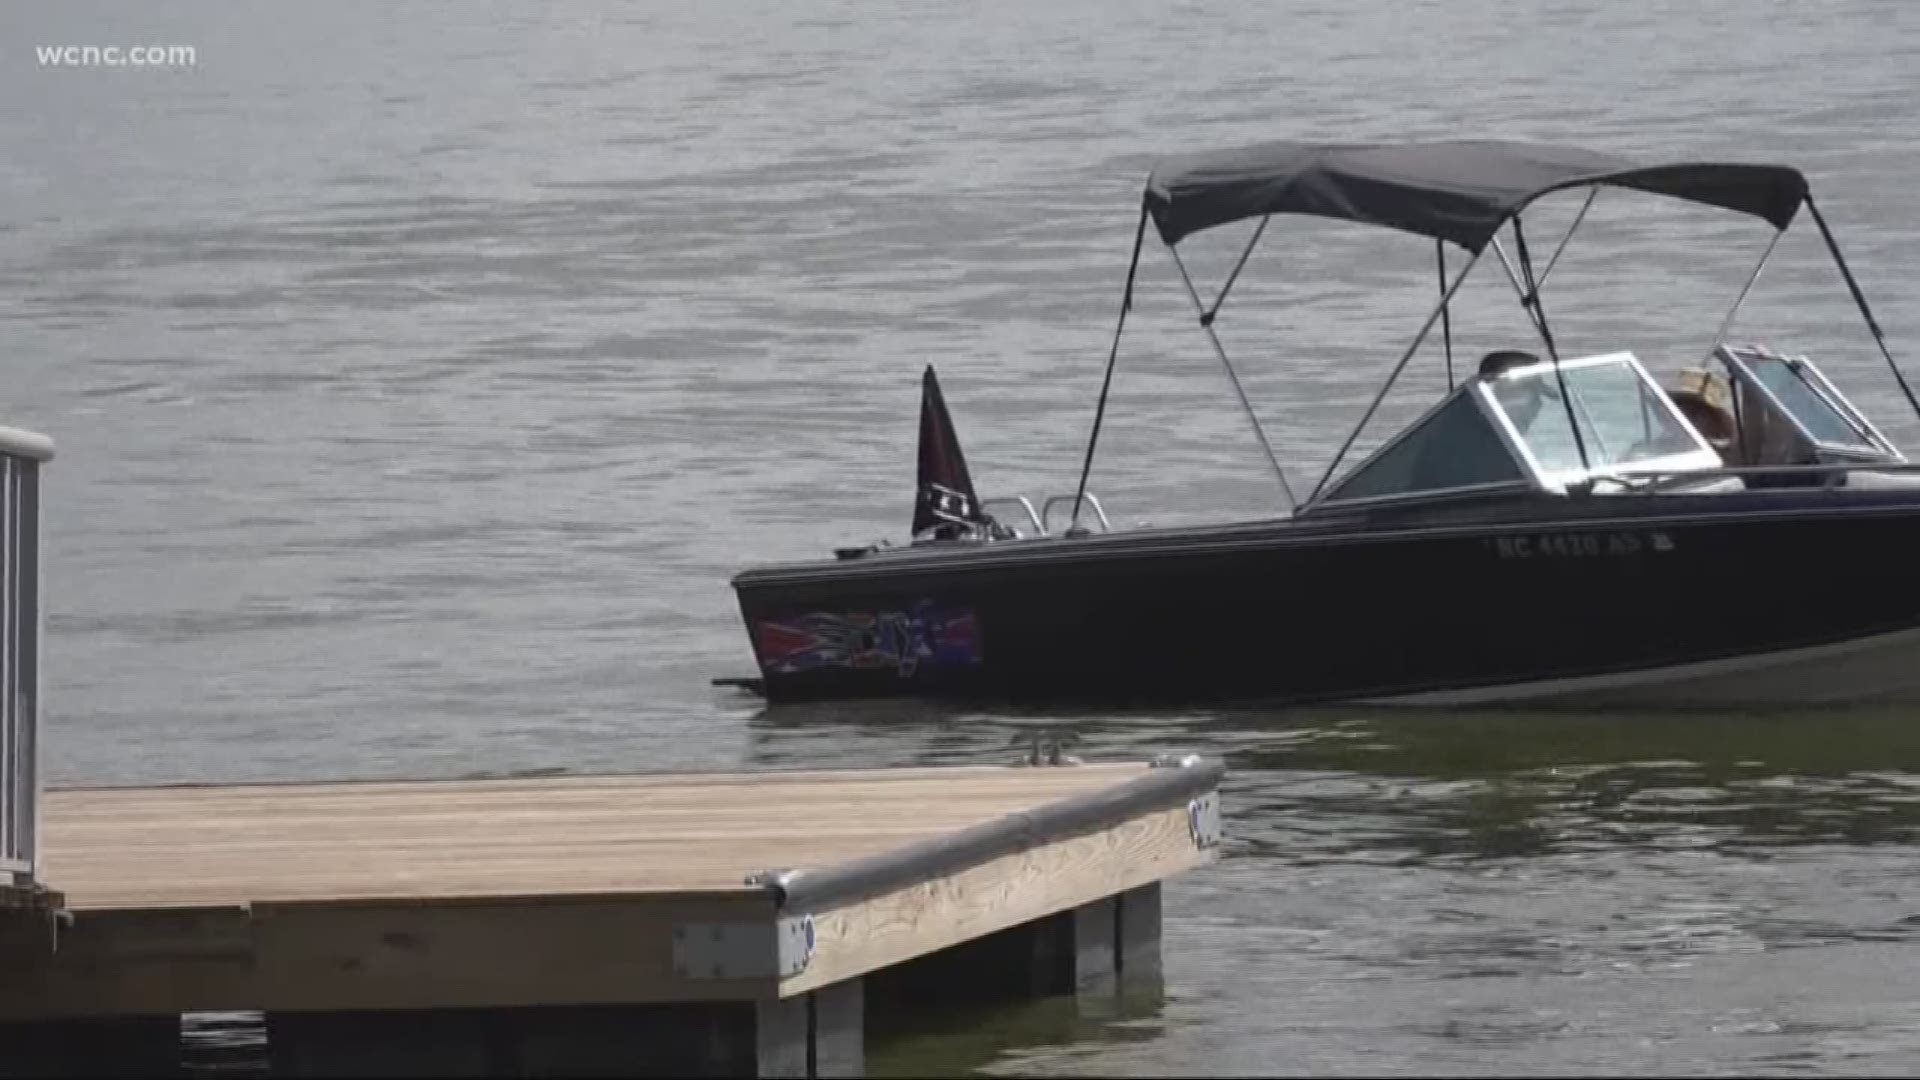 Search suspended for missing boater on High Rock Lake